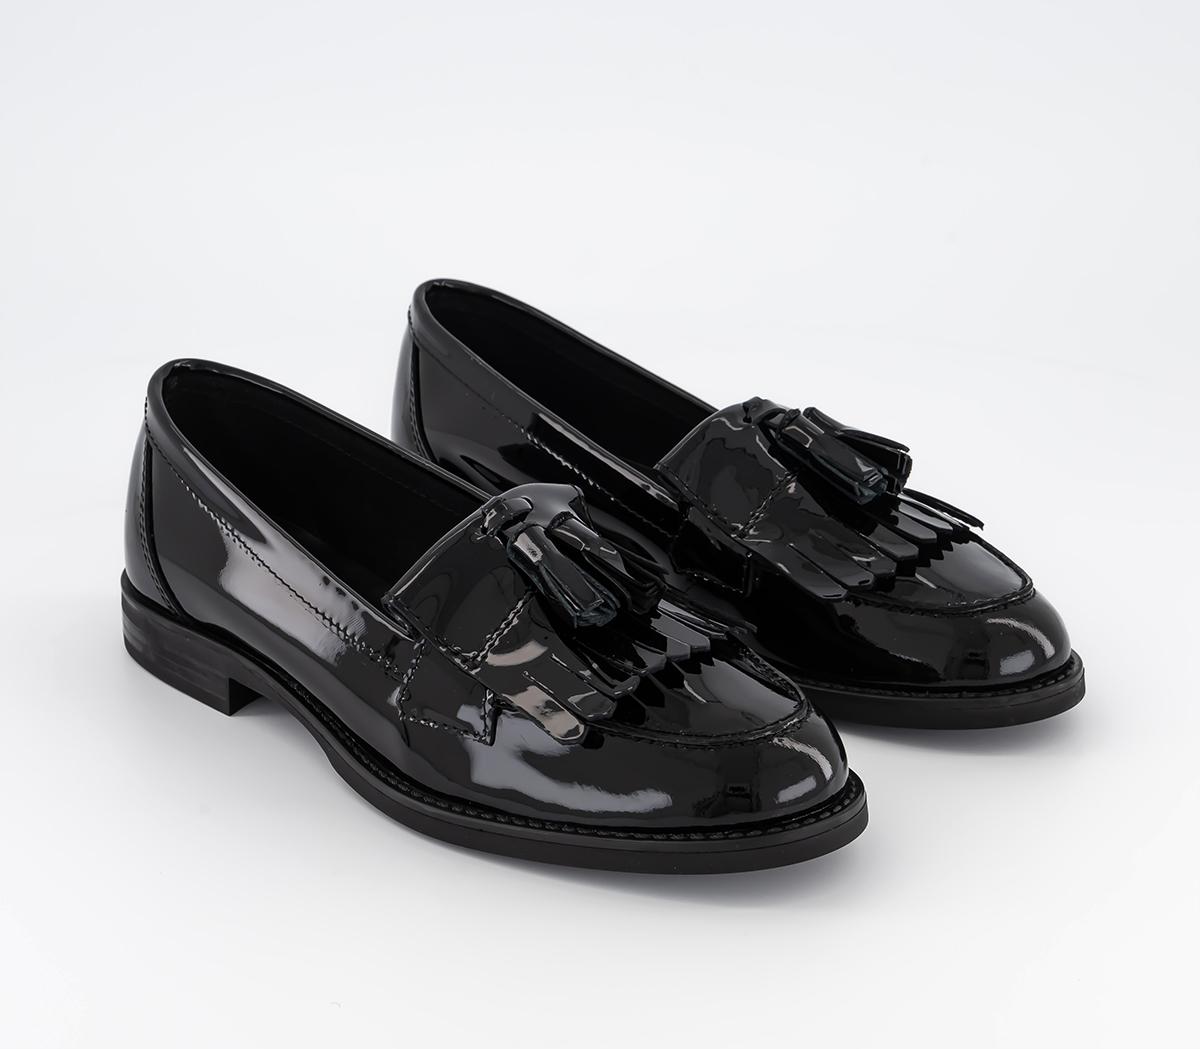 OFFICE Womens Fitz Tassle Fringe Loafers Black Patent Leather, 7